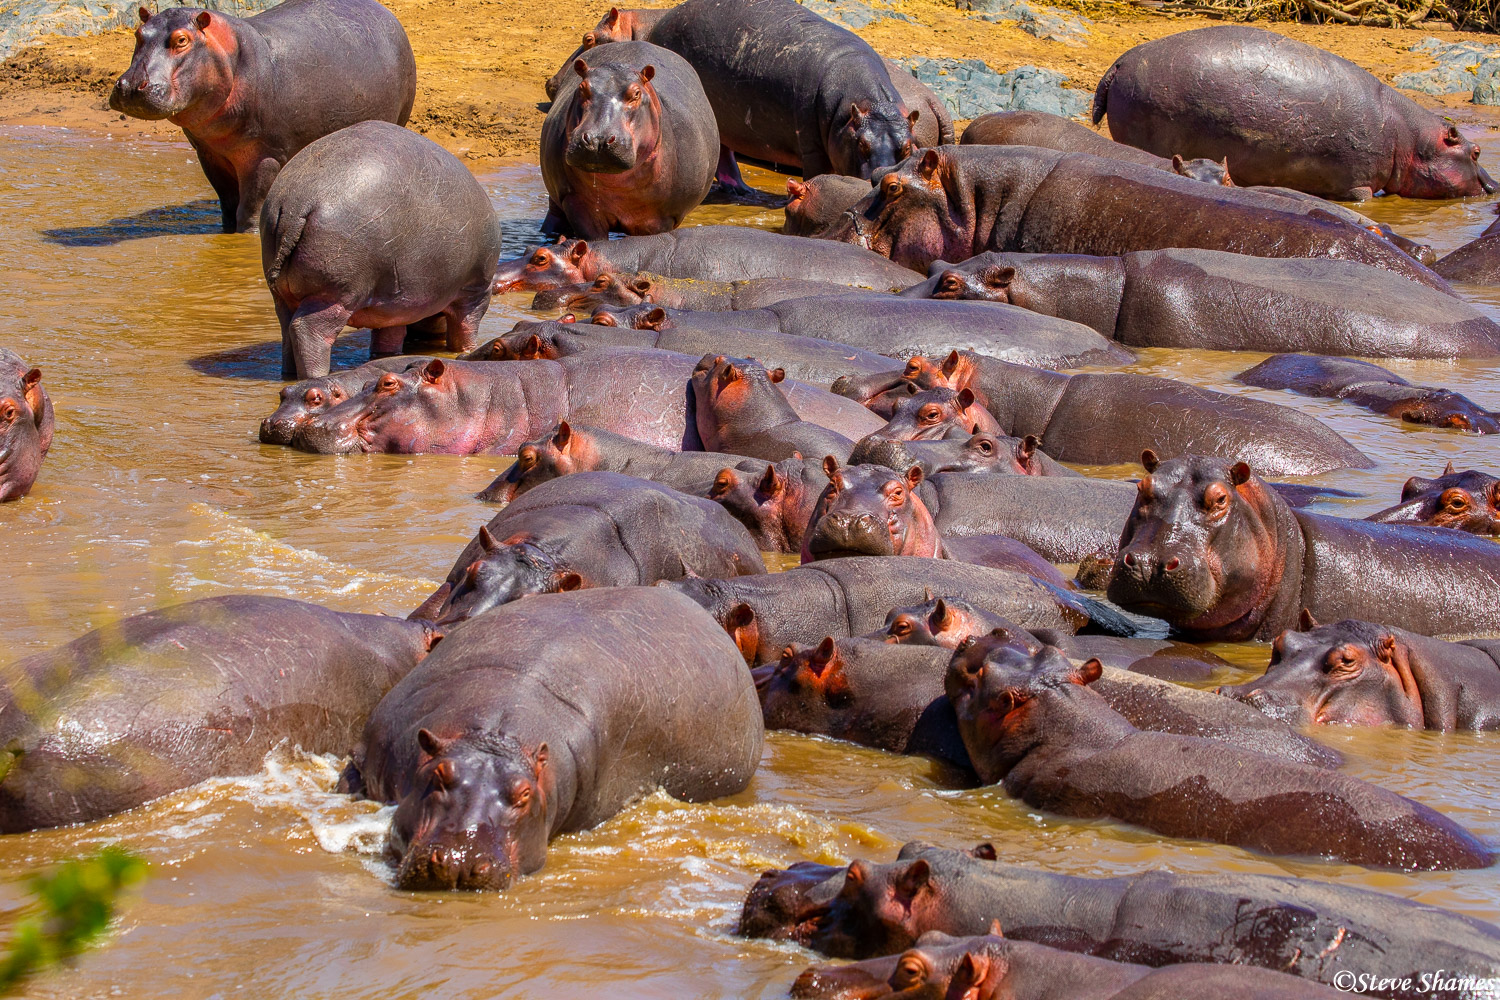 Here is a "bloat" of hippos. Another term for a group of hippos.